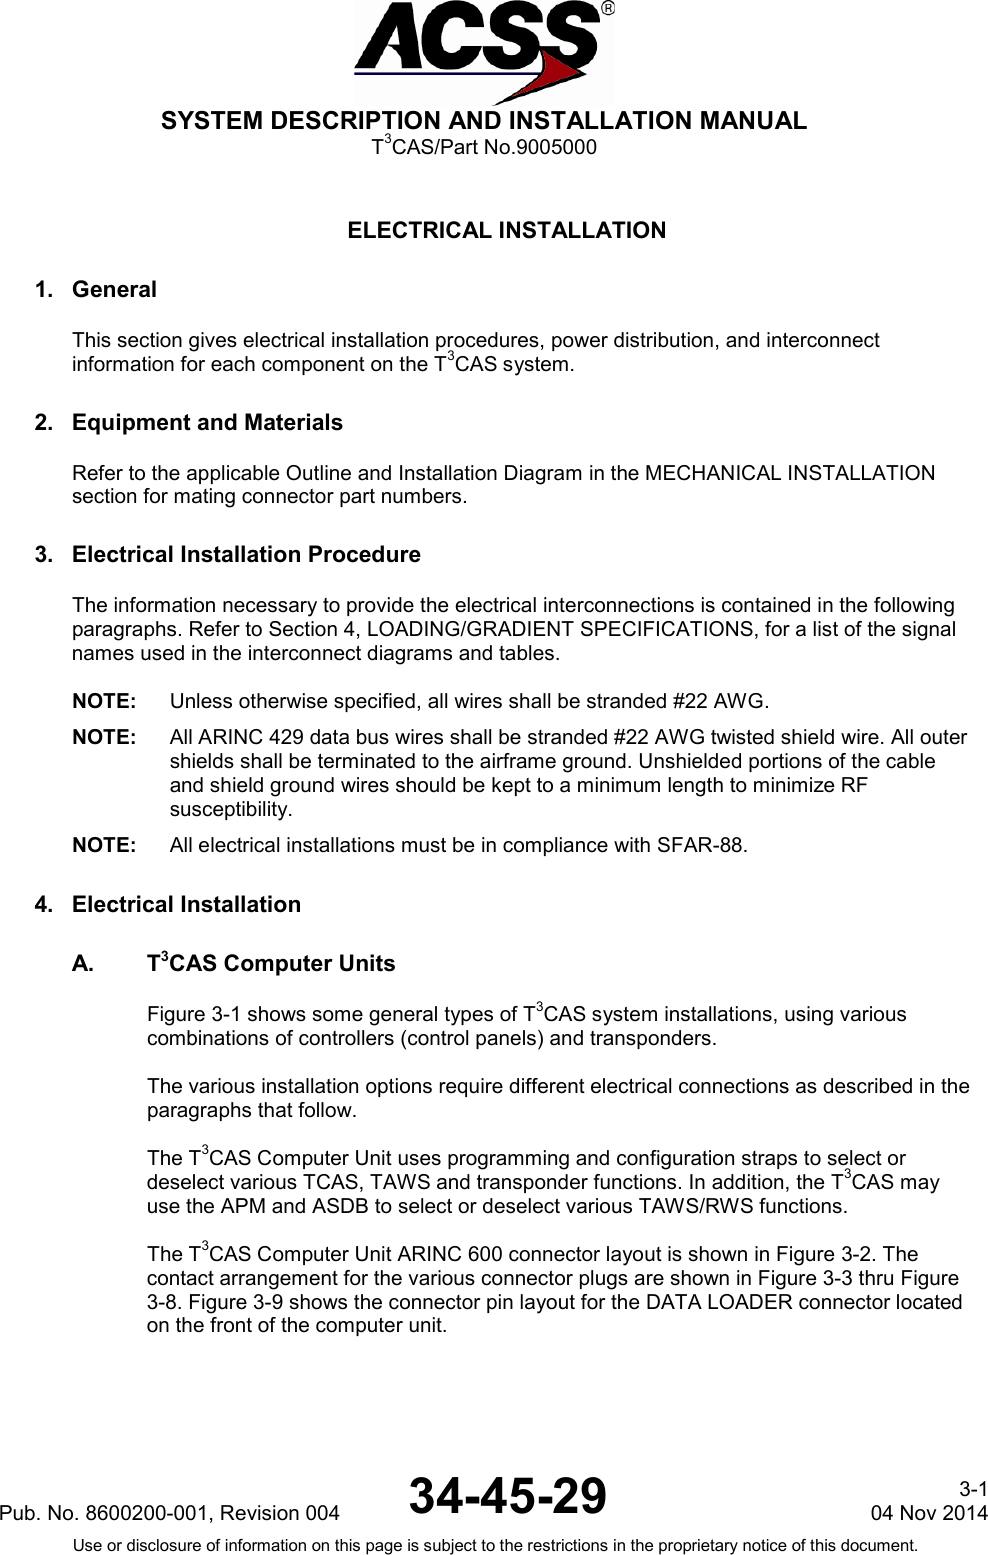  SYSTEM DESCRIPTION AND INSTALLATION MANUAL T3CAS/Part No.9005000  ELECTRICAL INSTALLATION 1. General This section gives electrical installation procedures, power distribution, and interconnect information for each component on the T3CAS system. 2. Equipment and Materials Refer to the applicable Outline and Installation Diagram in the MECHANICAL INSTALLATION section for mating connector part numbers. 3. Electrical Installation Procedure The information necessary to provide the electrical interconnections is contained in the following paragraphs. Refer to Section 4, LOADING/GRADIENT SPECIFICATIONS, for a list of the signal names used in the interconnect diagrams and tables.  NOTE: Unless otherwise specified, all wires shall be stranded #22 AWG. NOTE: All ARINC 429 data bus wires shall be stranded #22 AWG twisted shield wire. All outer shields shall be terminated to the airframe ground. Unshielded portions of the cable and shield ground wires should be kept to a minimum length to minimize RF susceptibility. NOTE: All electrical installations must be in compliance with SFAR-88. 4. Electrical Installation A.  T3CAS Computer Units Figure 3-1 shows some general types of T3CAS system installations, using various combinations of controllers (control panels) and transponders.  The various installation options require different electrical connections as described in the paragraphs that follow.  The T3CAS Computer Unit uses programming and configuration straps to select or deselect various TCAS, TAWS and transponder functions. In addition, the T3CAS may use the APM and ASDB to select or deselect various TAWS/RWS functions.  The T3CAS Computer Unit ARINC 600 connector layout is shown in Figure 3-2. The contact arrangement for the various connector plugs are shown in Figure 3-3 thru Figure 3-8. Figure 3-9 shows the connector pin layout for the DATA LOADER connector located on the front of the computer unit. Pub. No. 8600200-001, Revision 004  34-45-29 3-1 04 Nov 2014 Use or disclosure of information on this page is subject to the restrictions in the proprietary notice of this document.   